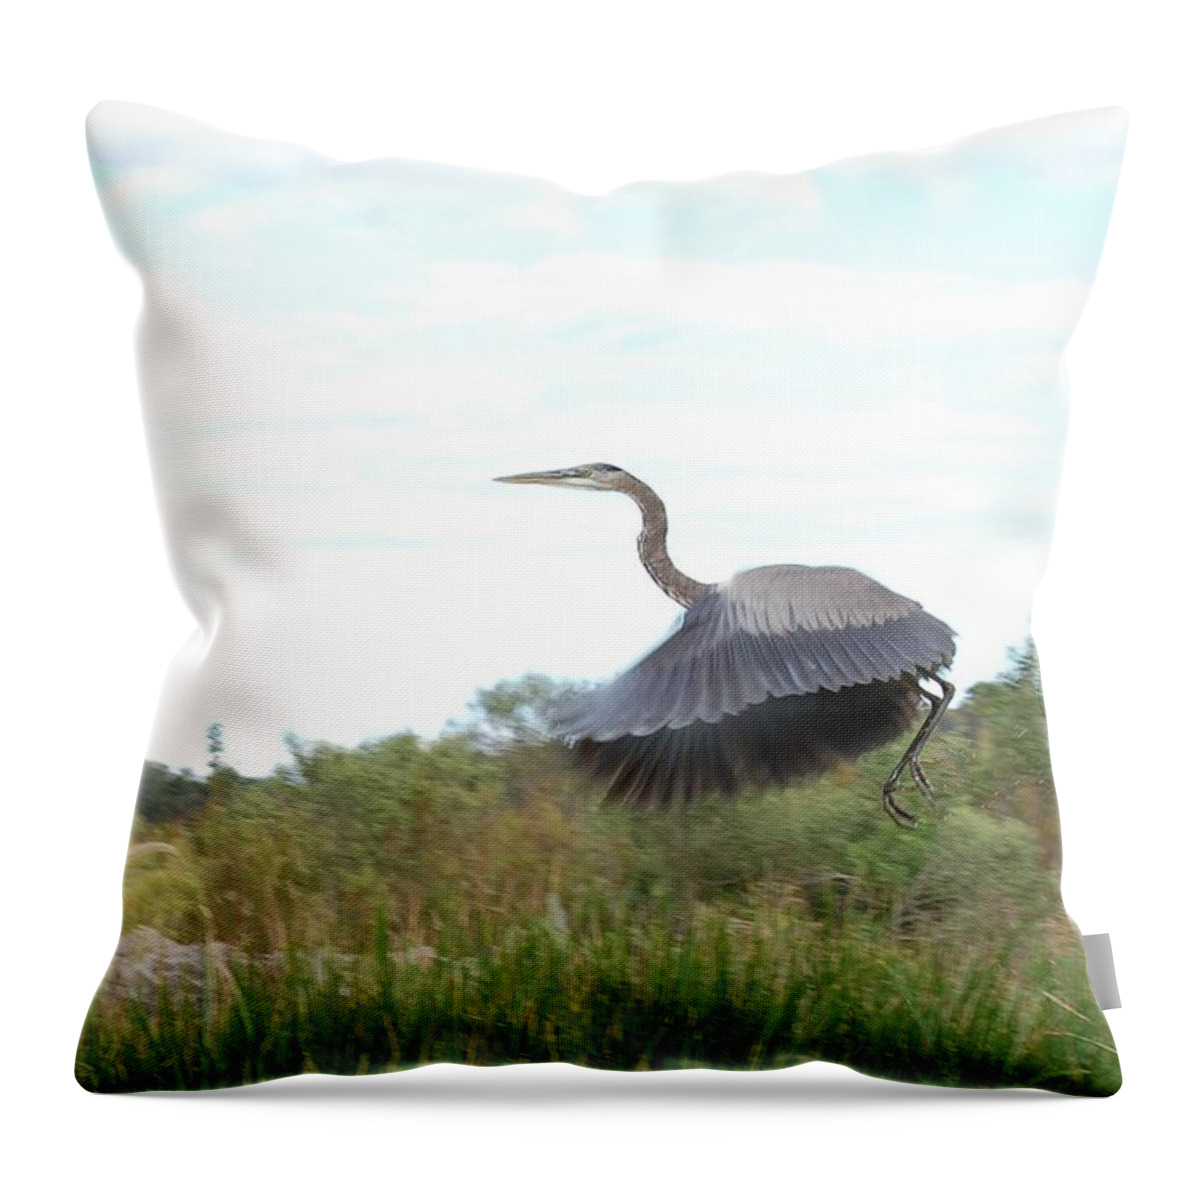 Ready For Takeoff Throw Pillow featuring the photograph Ready for Takeoff by Jennifer Forsyth